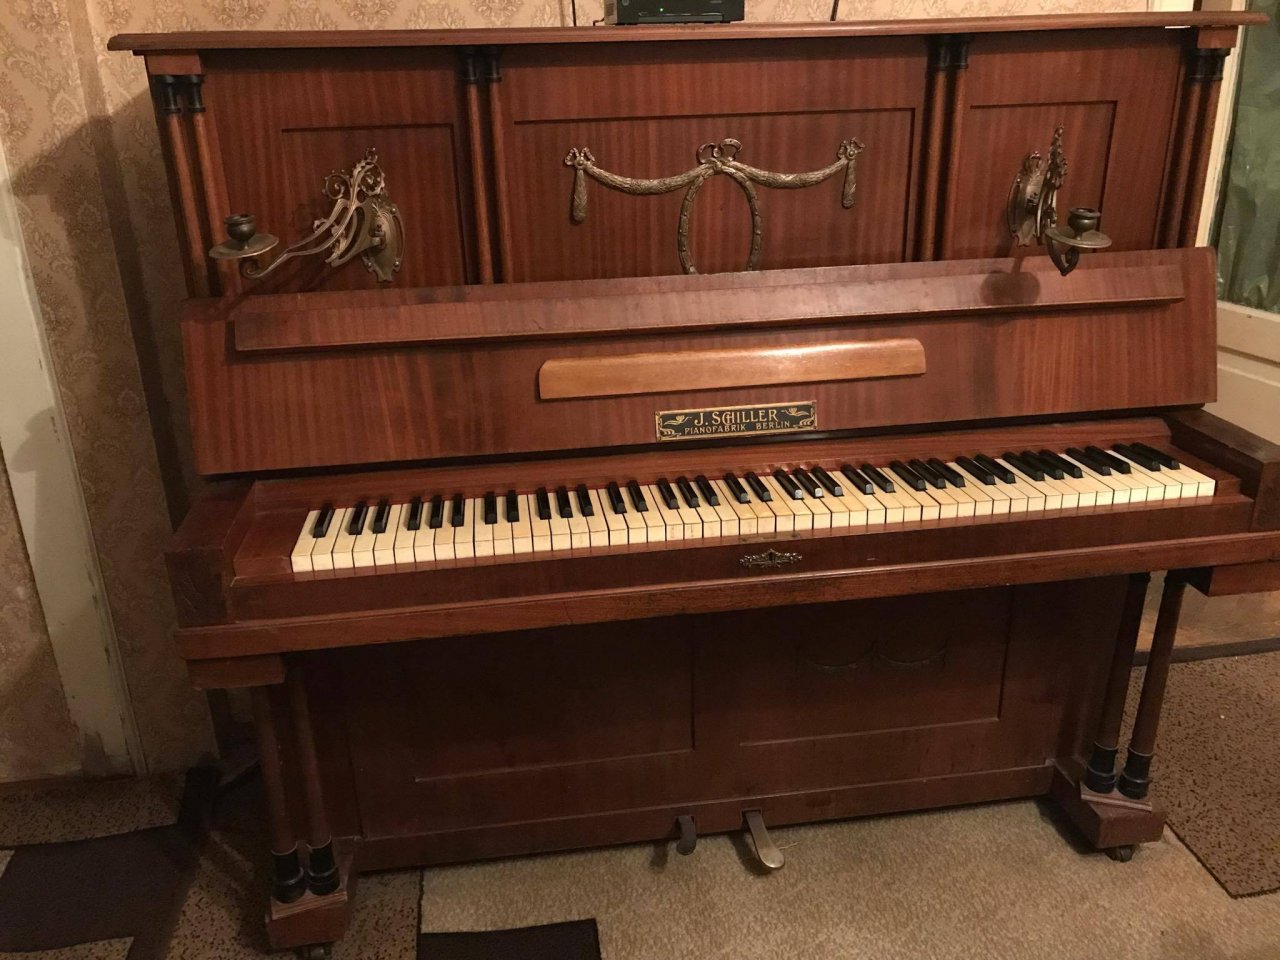 Carnicero Morbosidad Estar satisfecho Hello There, I Have A Piano J.schiller Serial Number 10660 . Can You Tell  M... | My Piano Friends